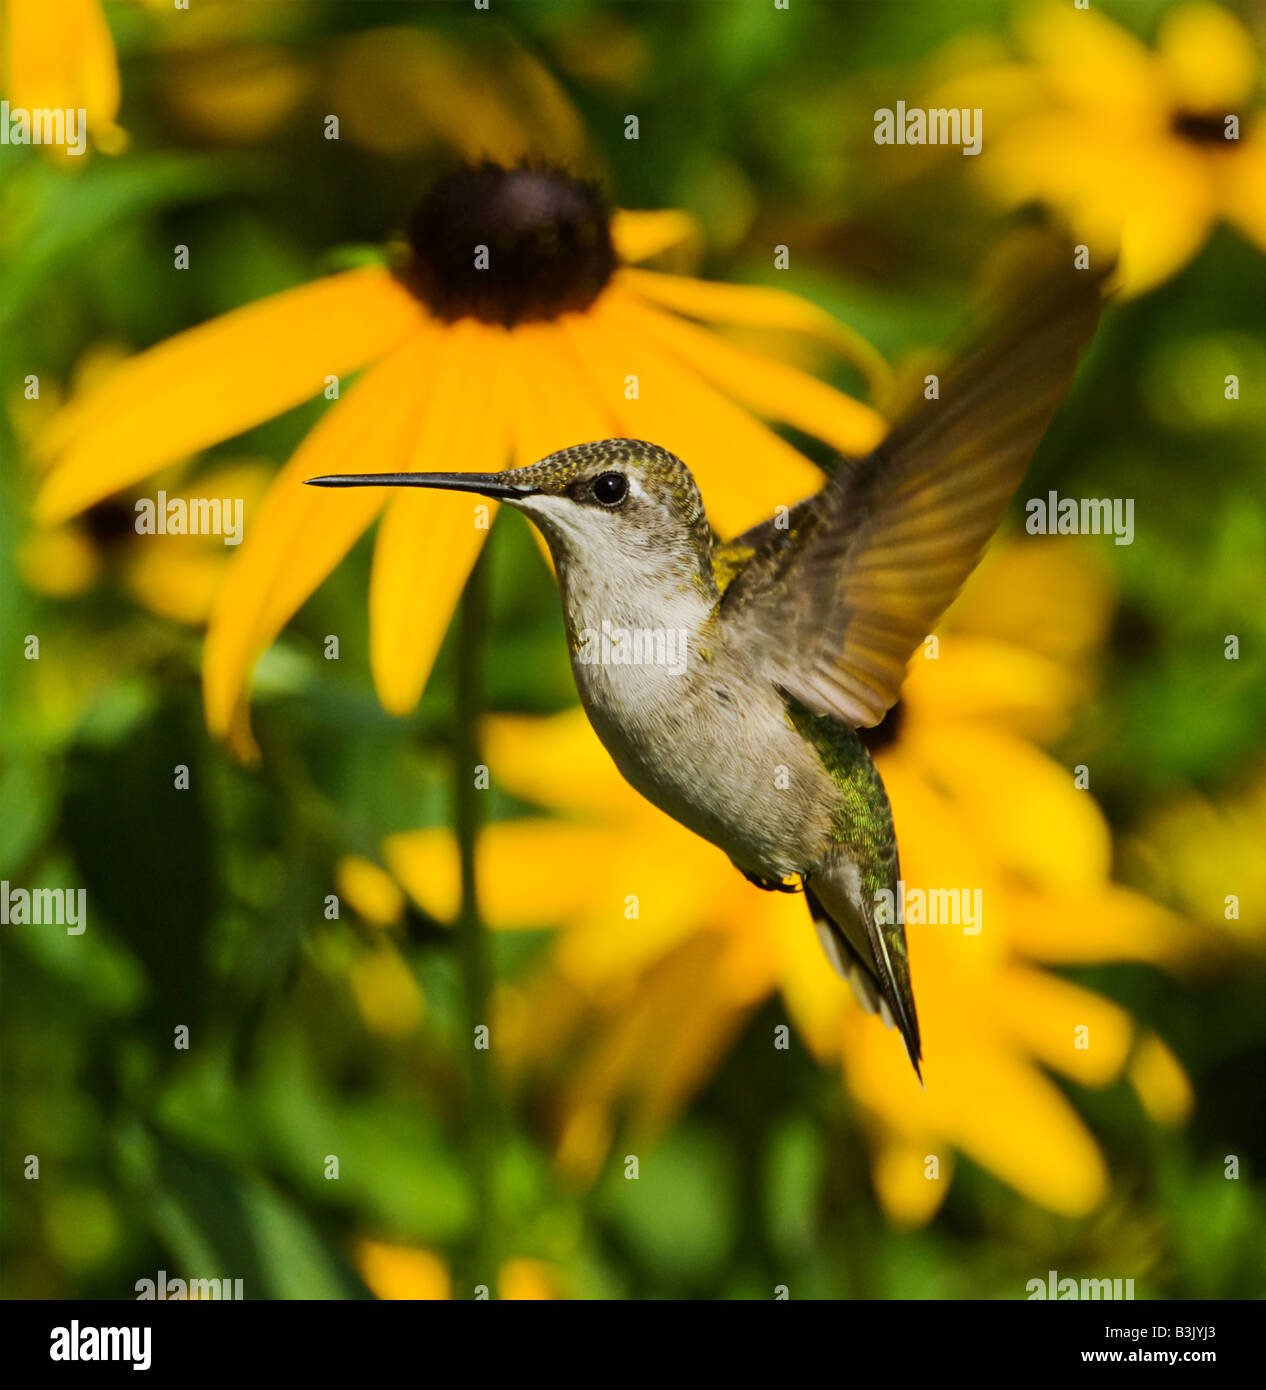 A Ruby-Throated Hummingbird hovers in front of some Black Eyed Susans. Stock Photo